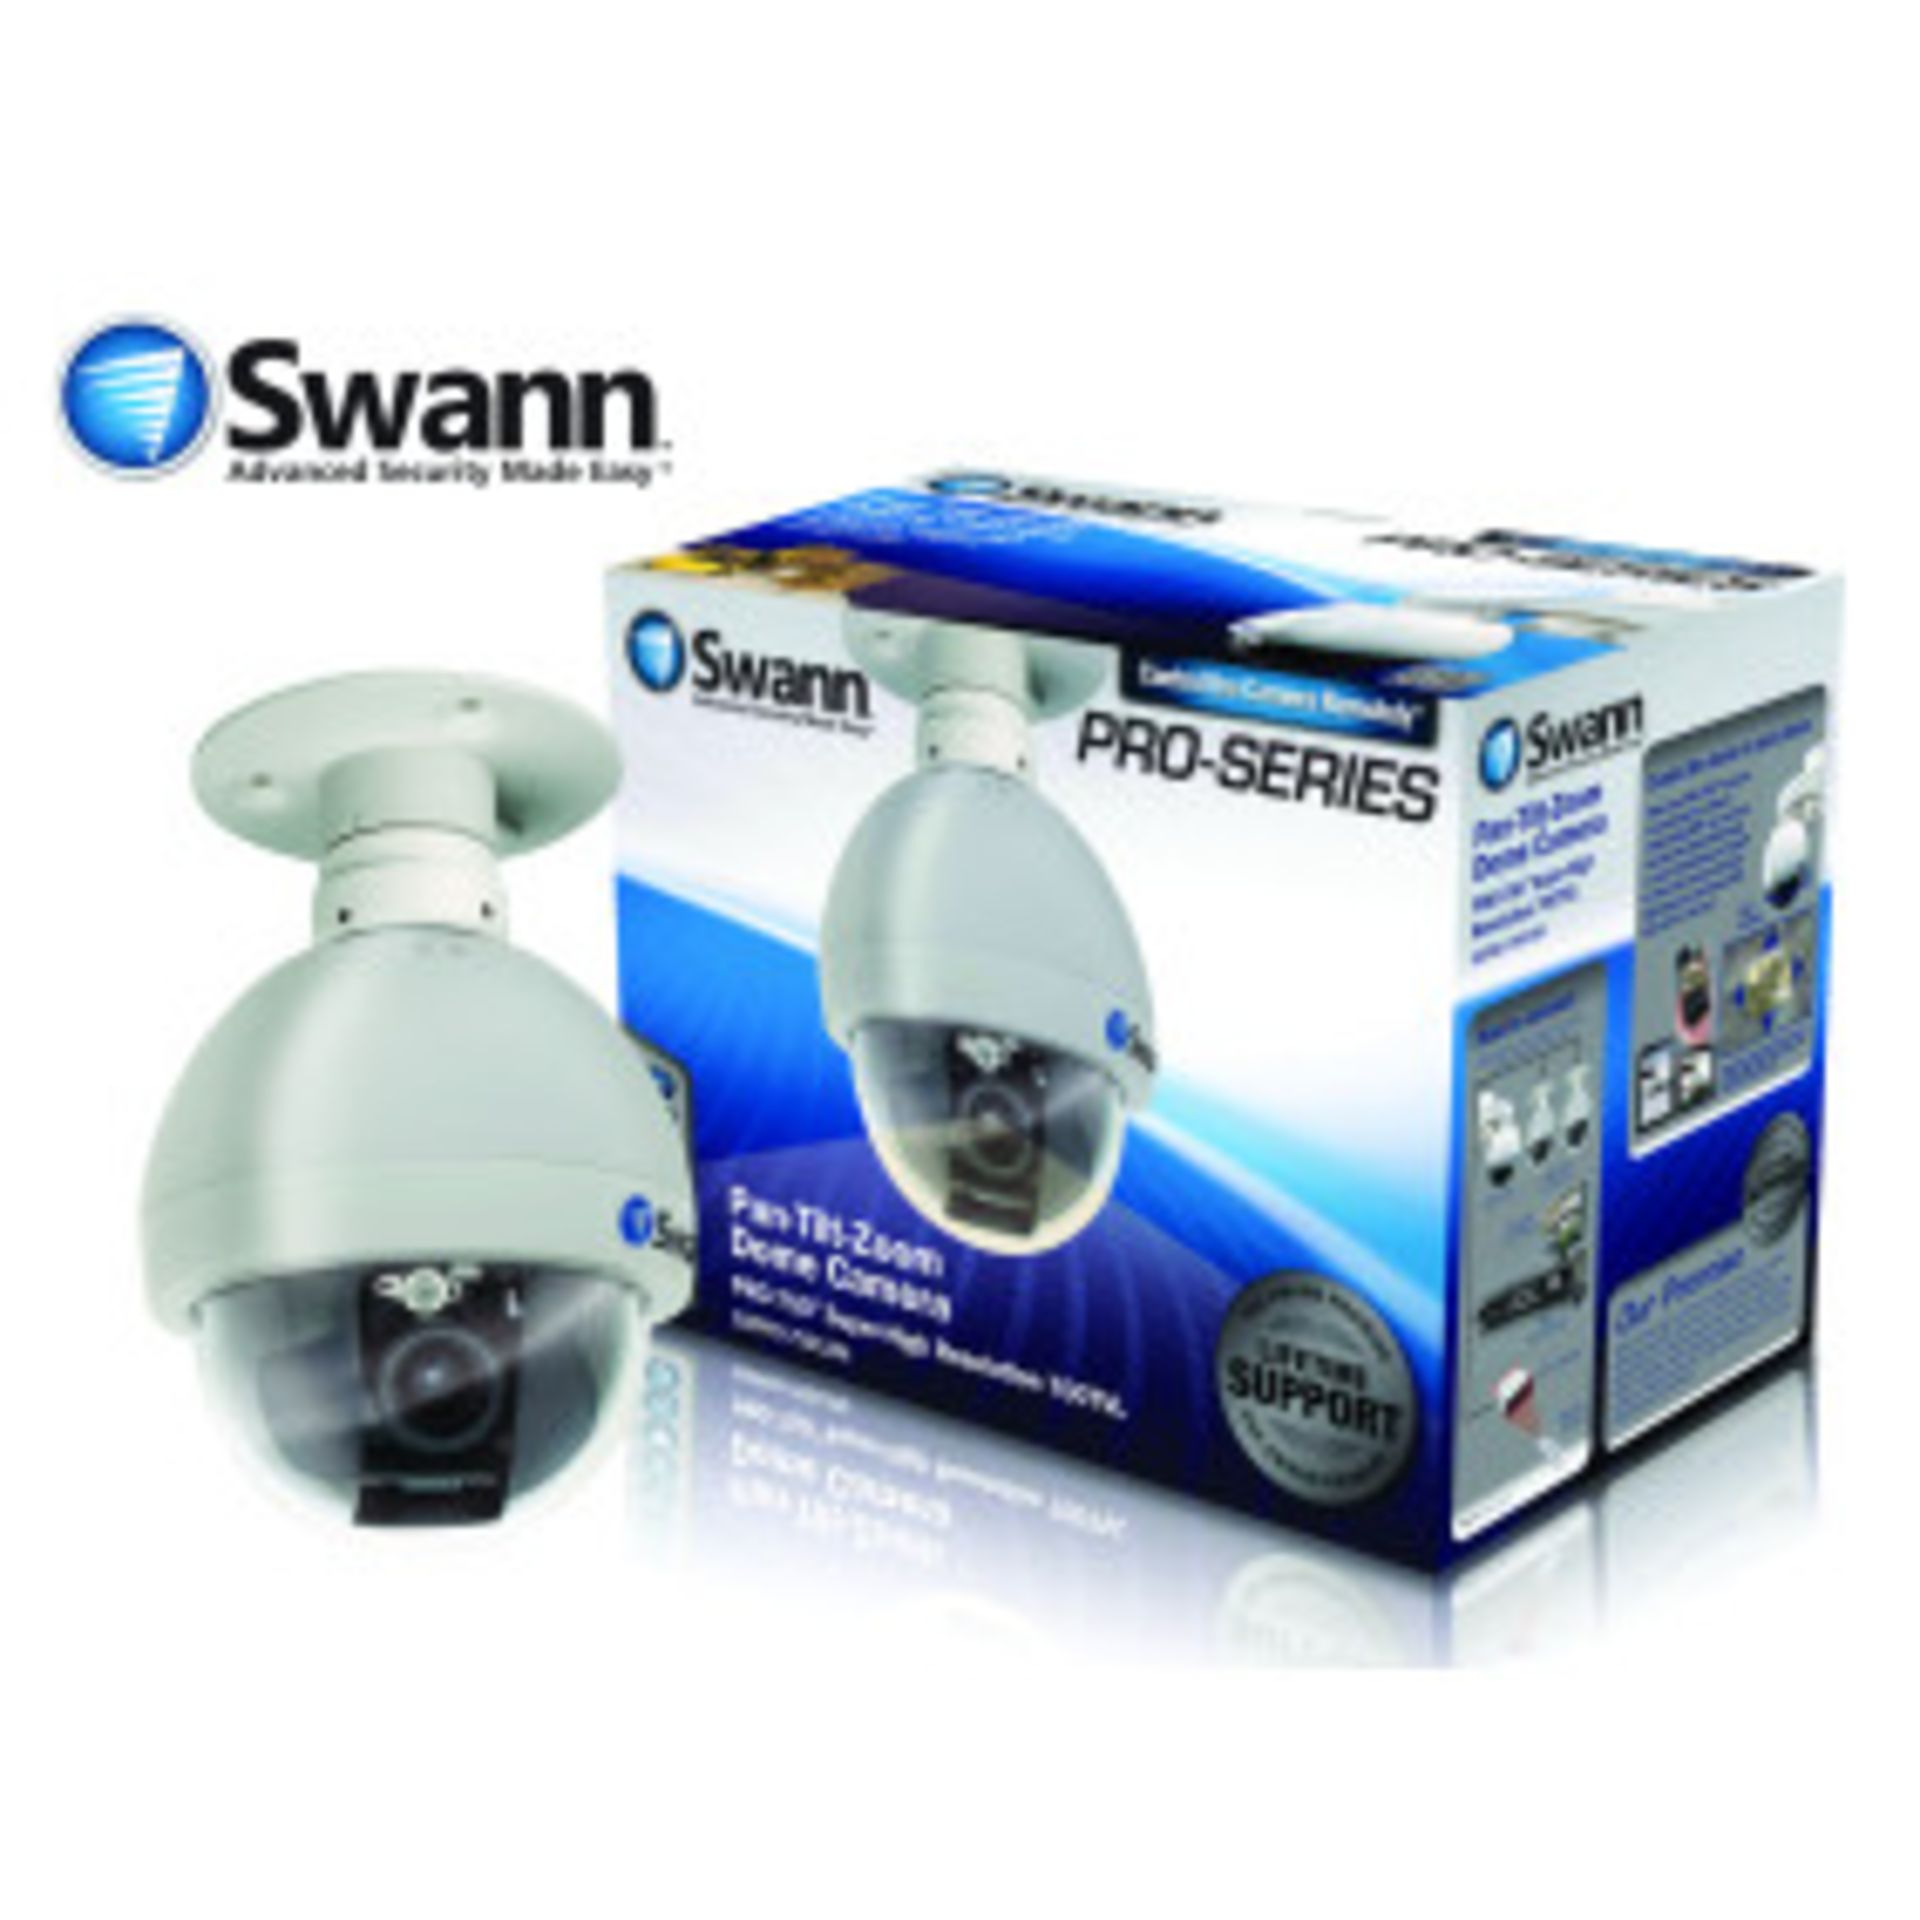 V *TRADE QTY* Brand New Swann PRO-750 700TVL PTZ (Pan Tilt Zoom) Dome Camera - Variable Viewing - Image 2 of 3